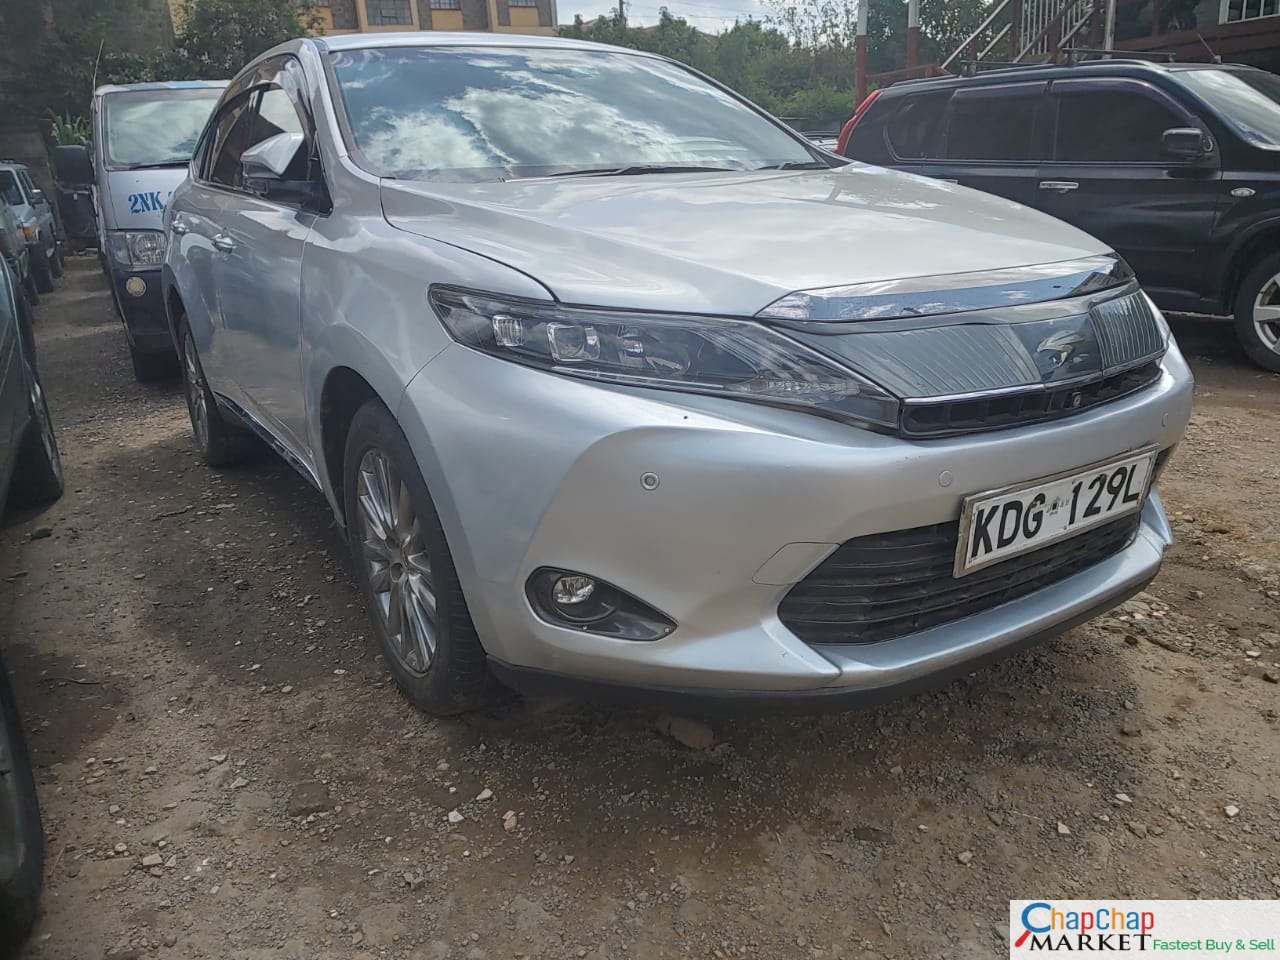 Cars Cars For Sale/Vehicles-Toyota Harrier for Sale in Kenya New shape You Pay 30% Deposit Trade in OK EXCLUSIVE 🔥 8